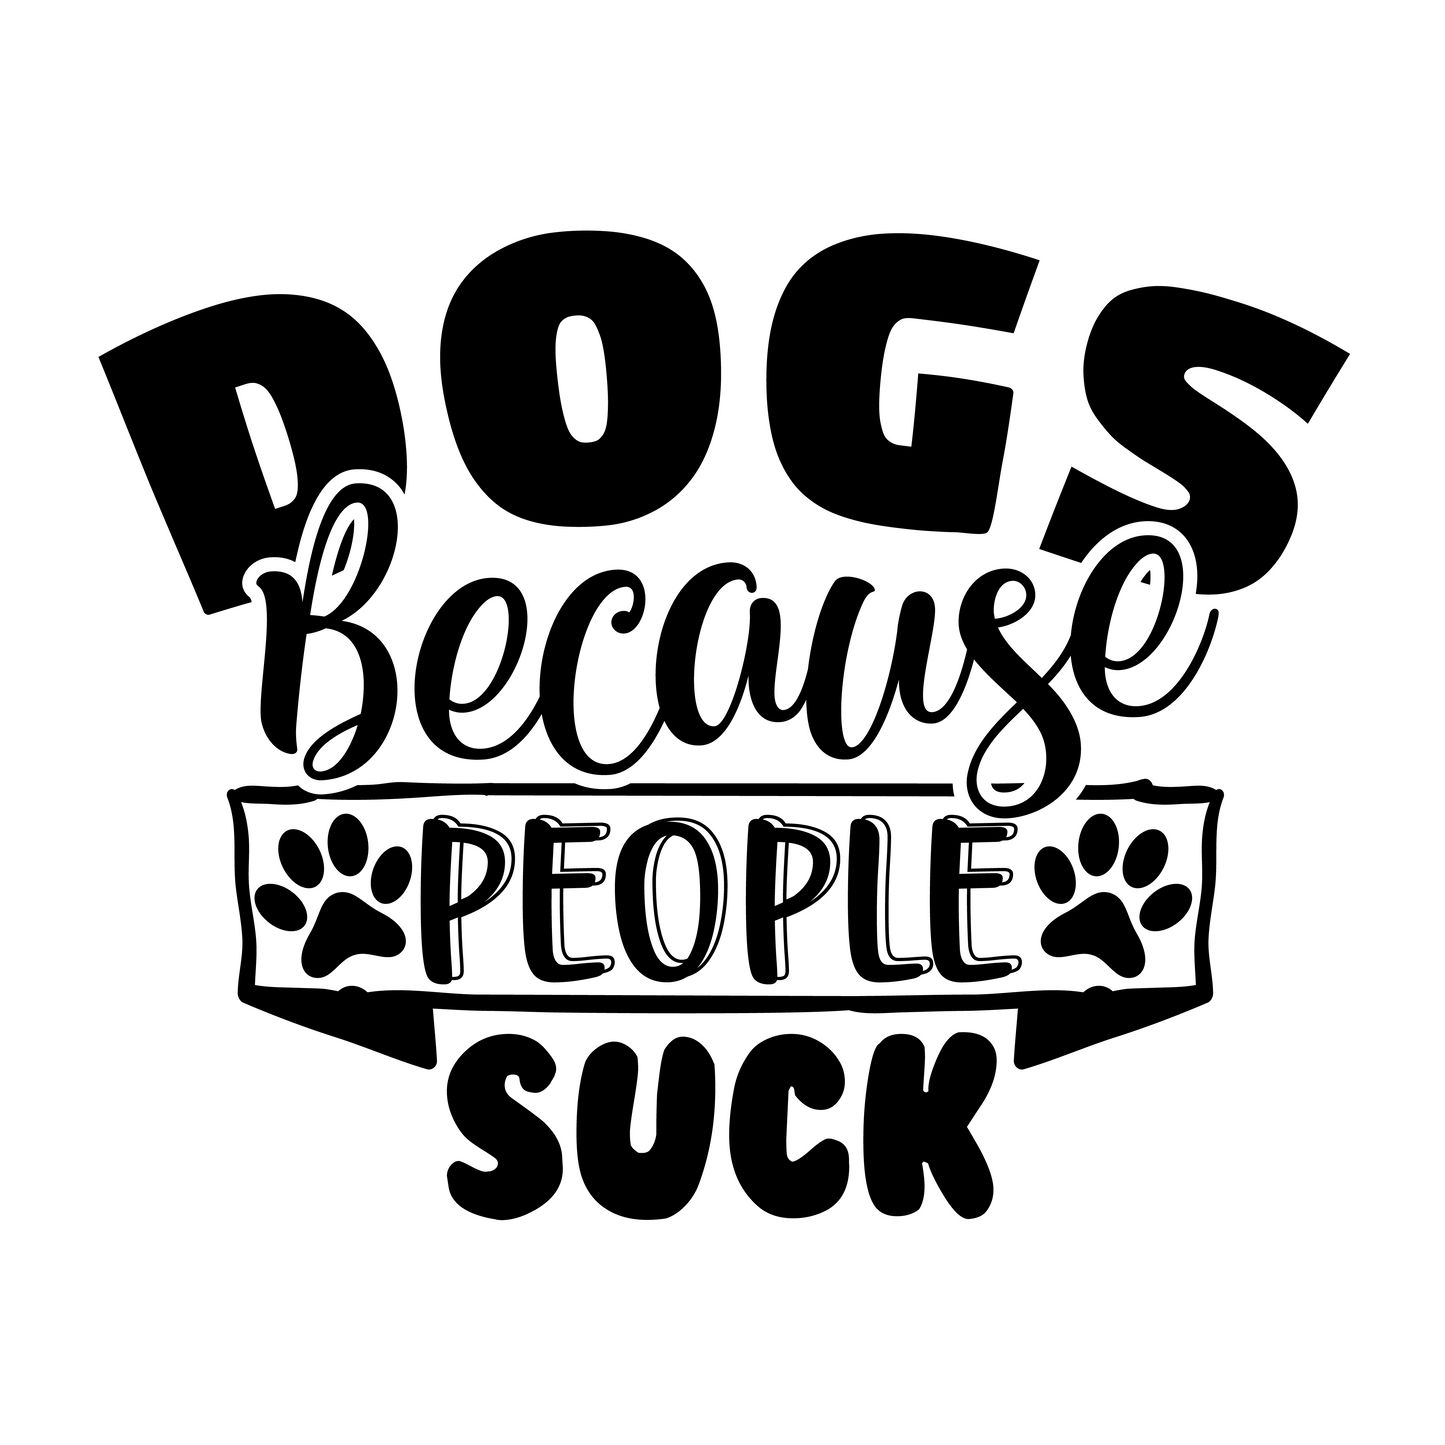 Stickers - Dog Quotes - Dogs Because People Suck Sticker